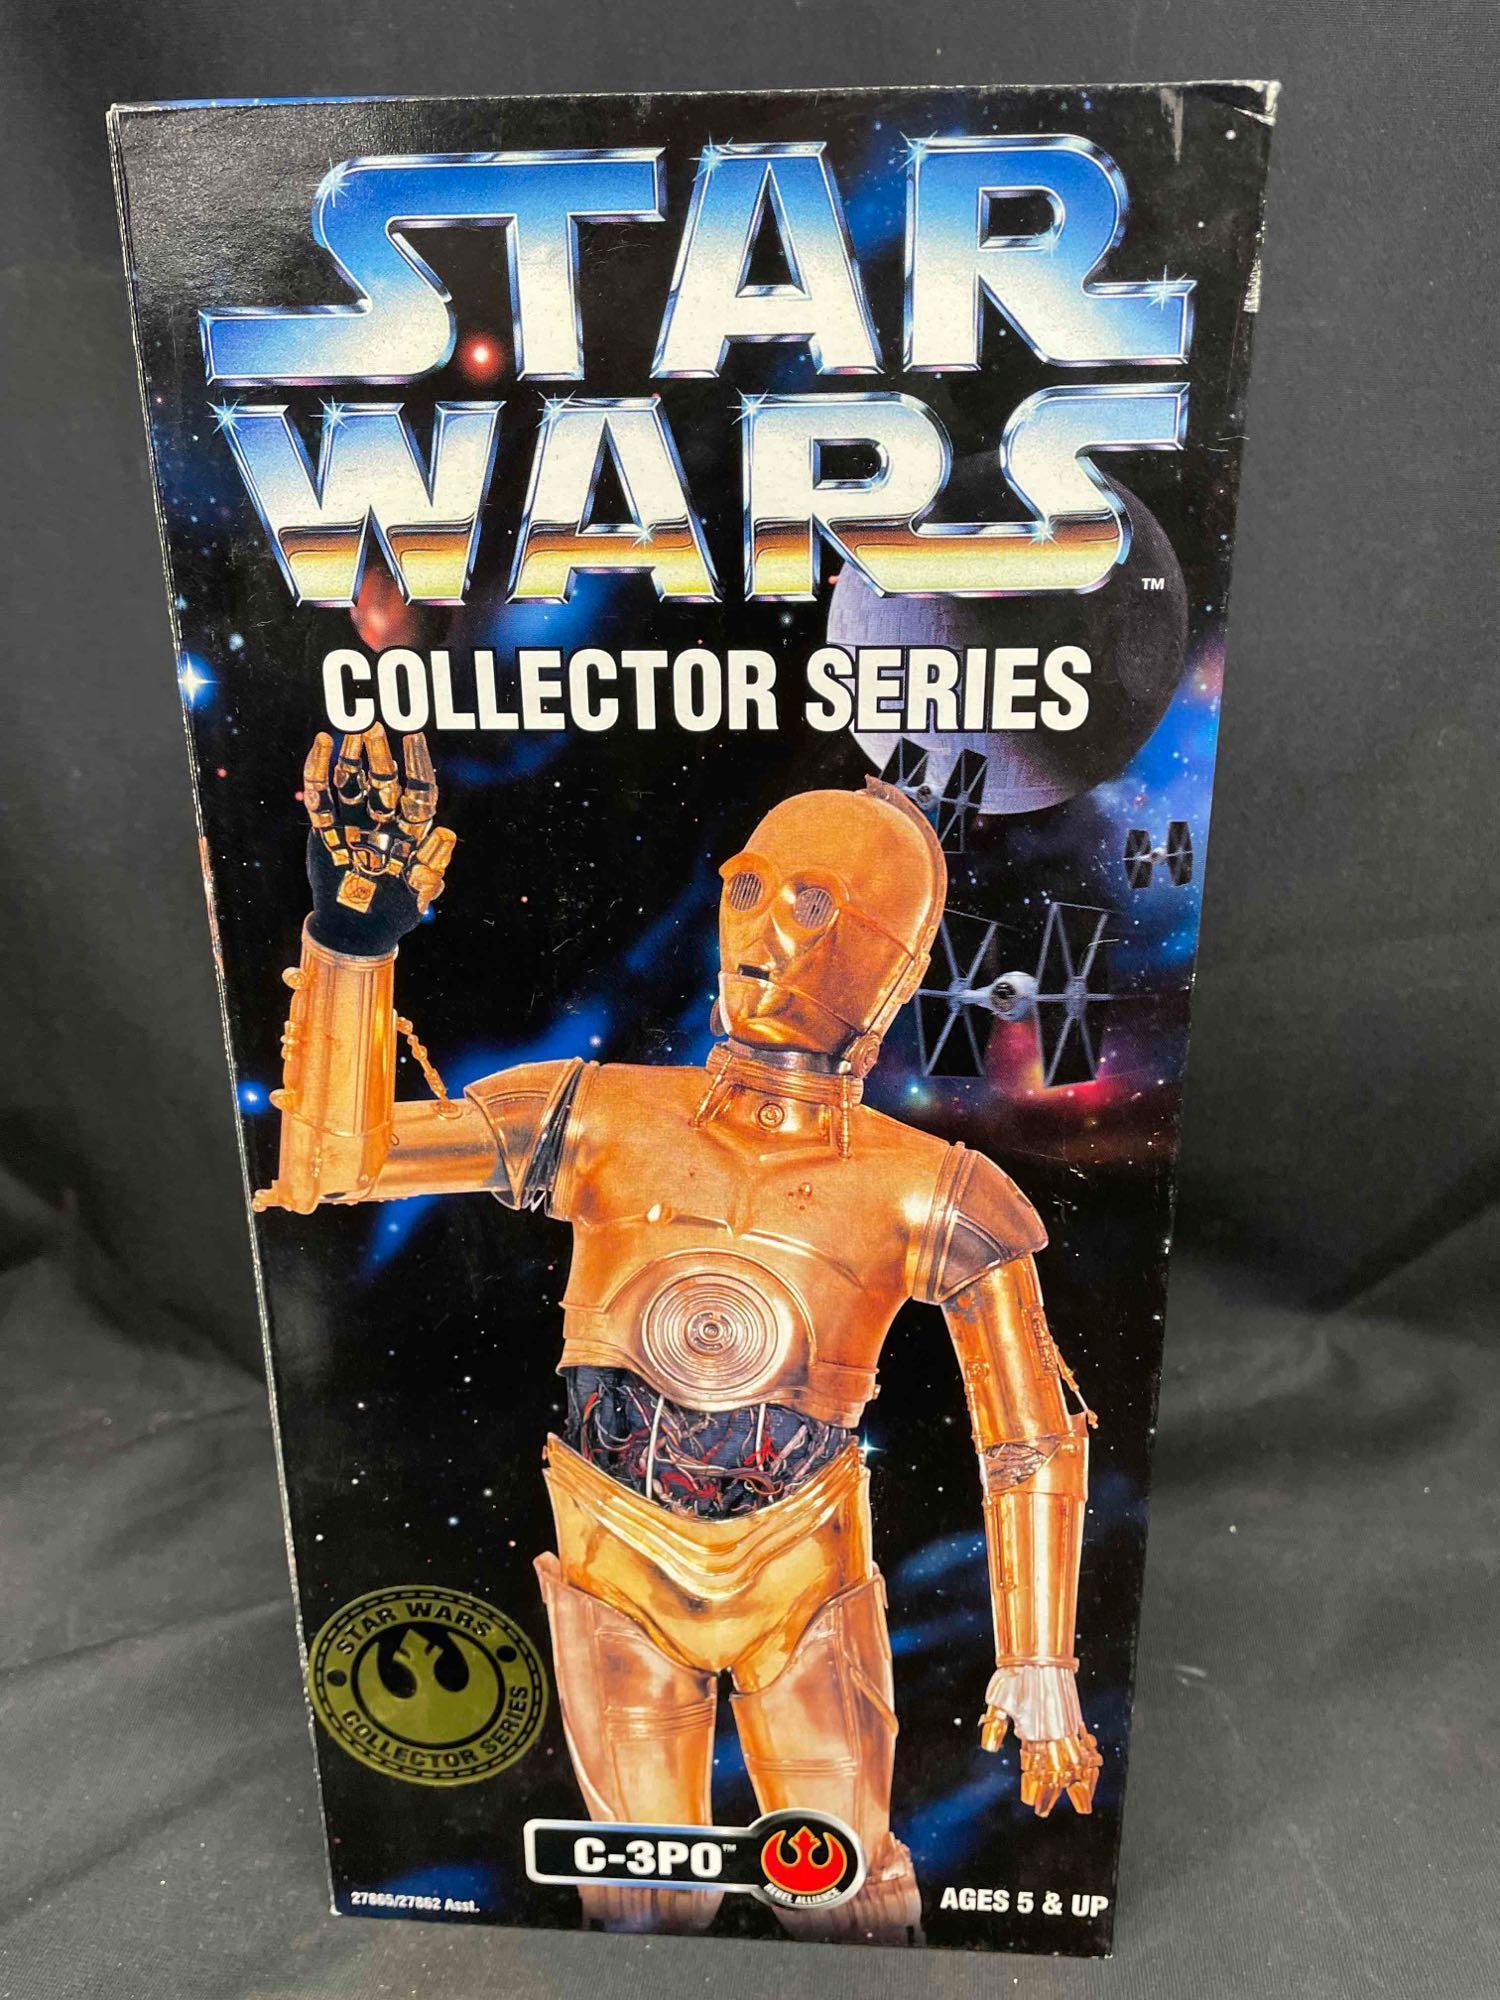 C-3P0 Collector Series 1997 and Death Star Droid POTJ 2001